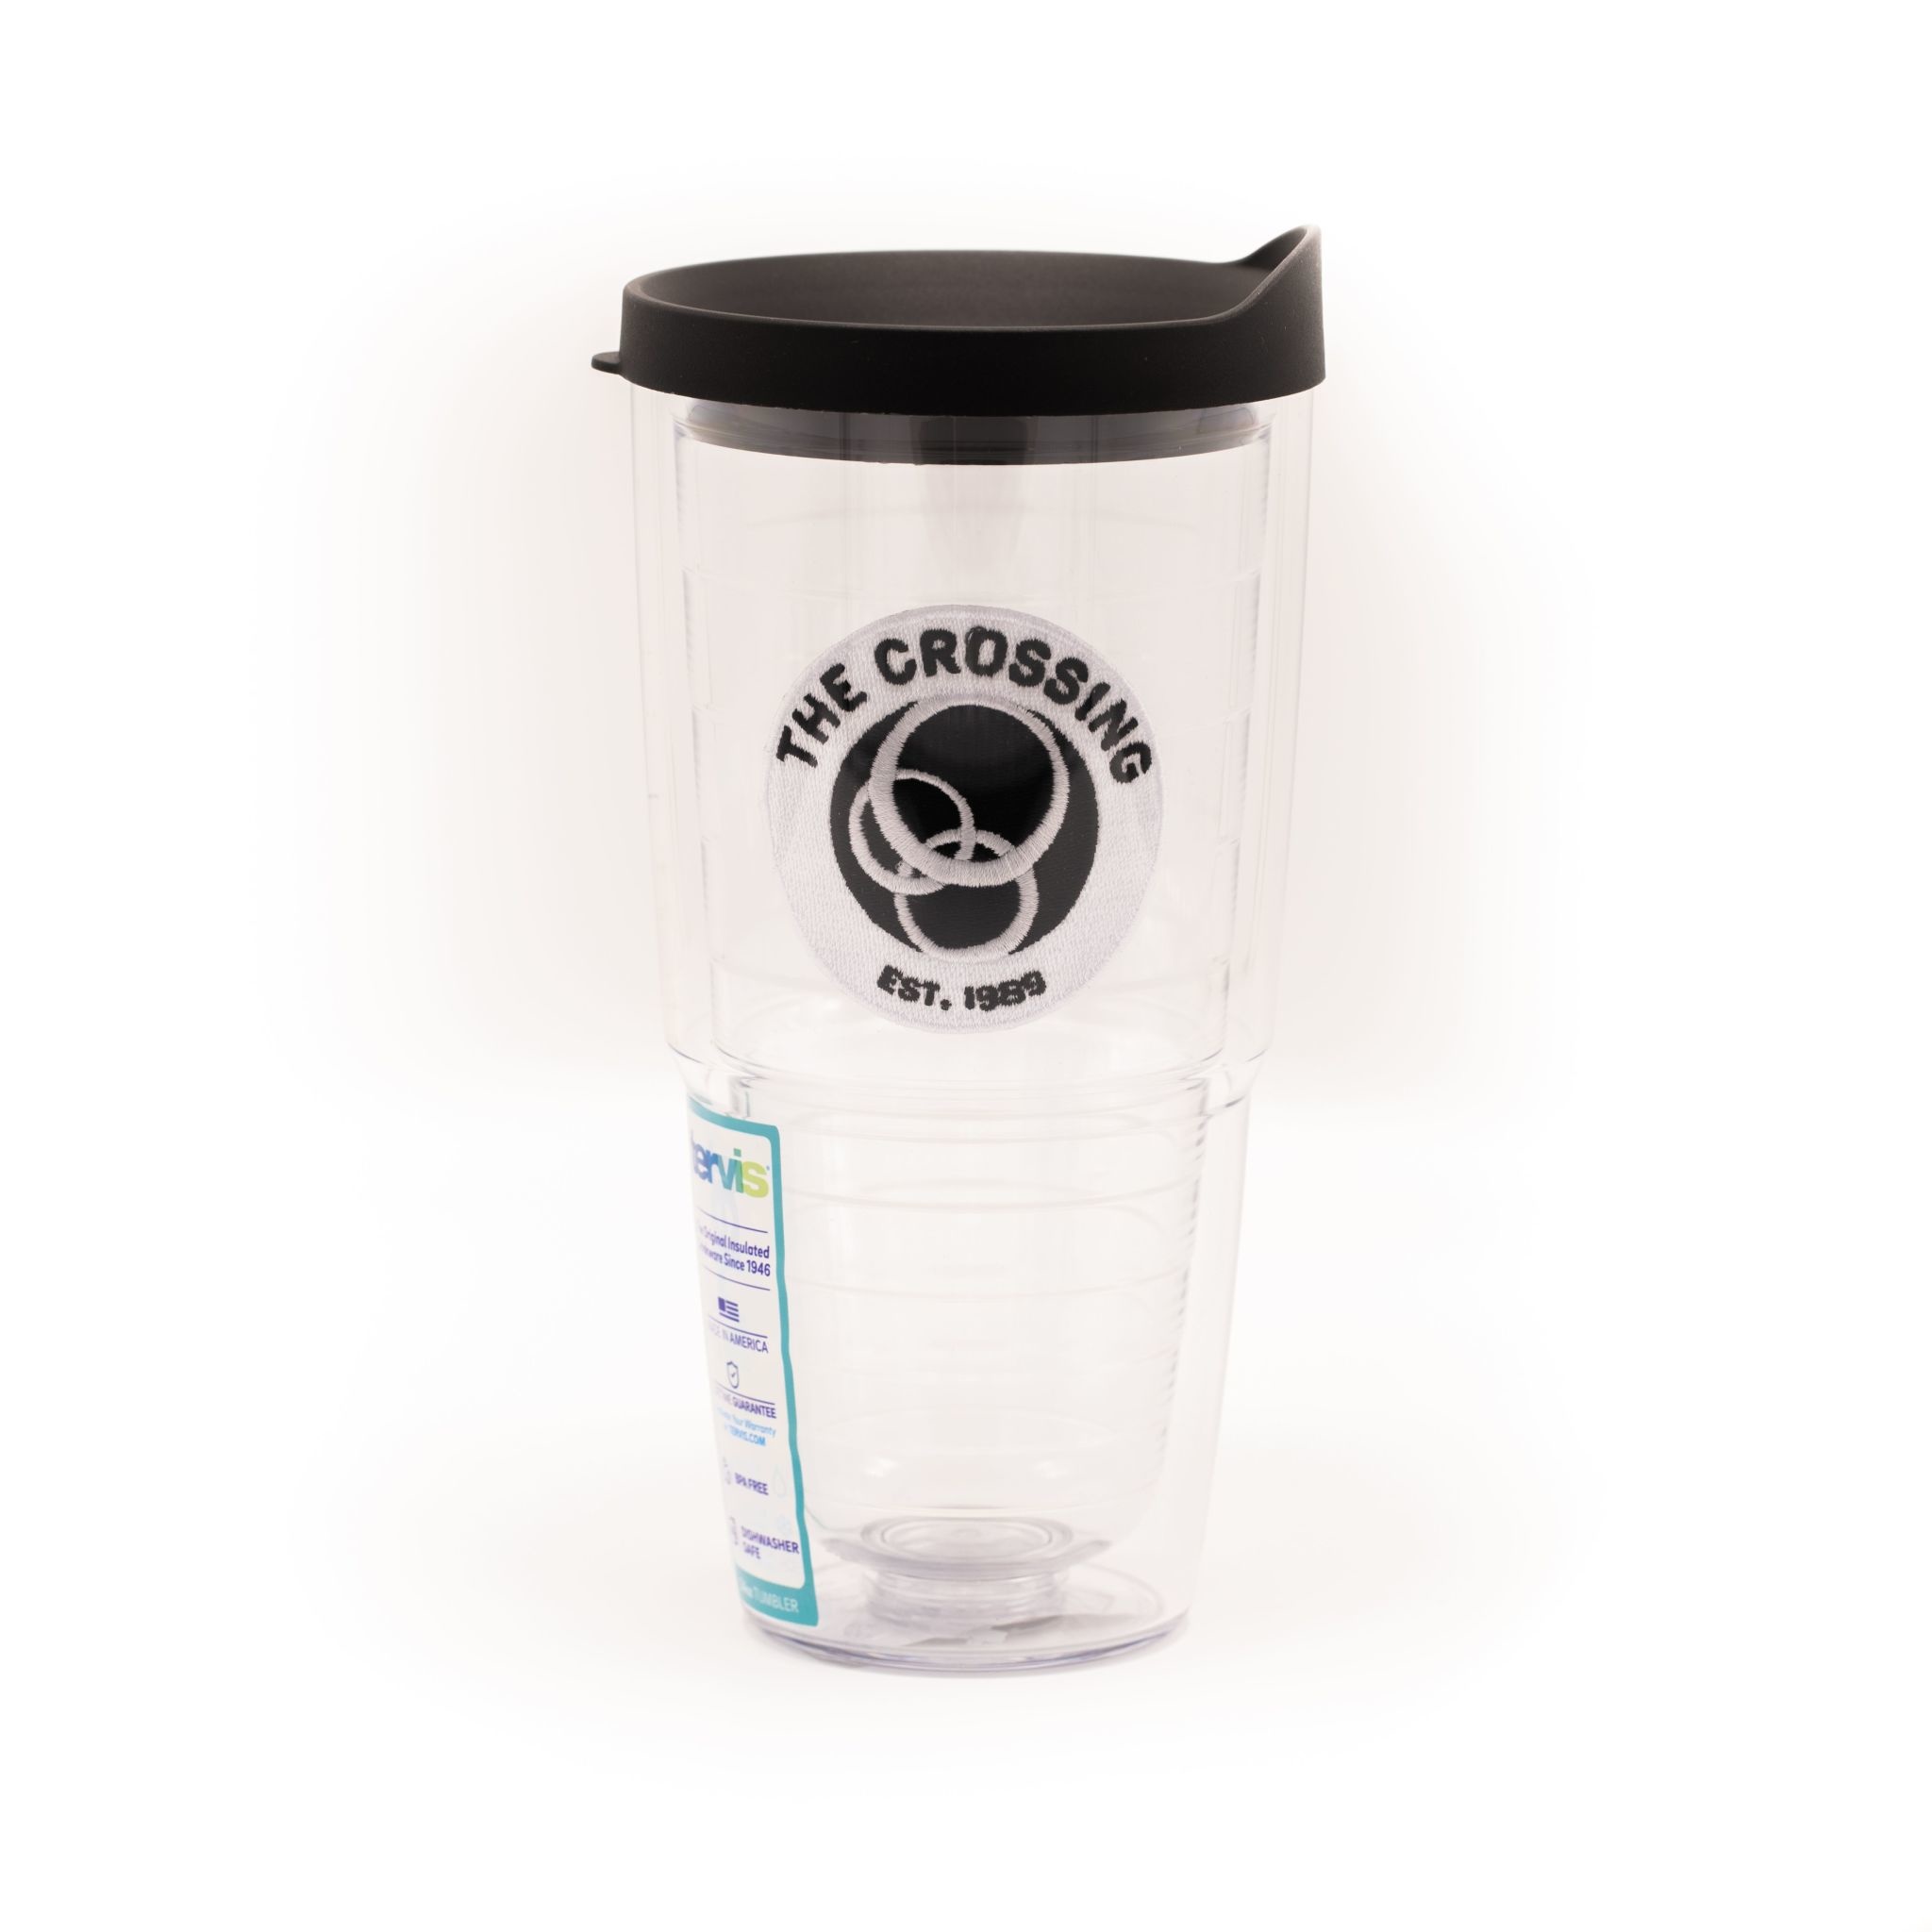 Crossing Tervis Tumbler with Lid